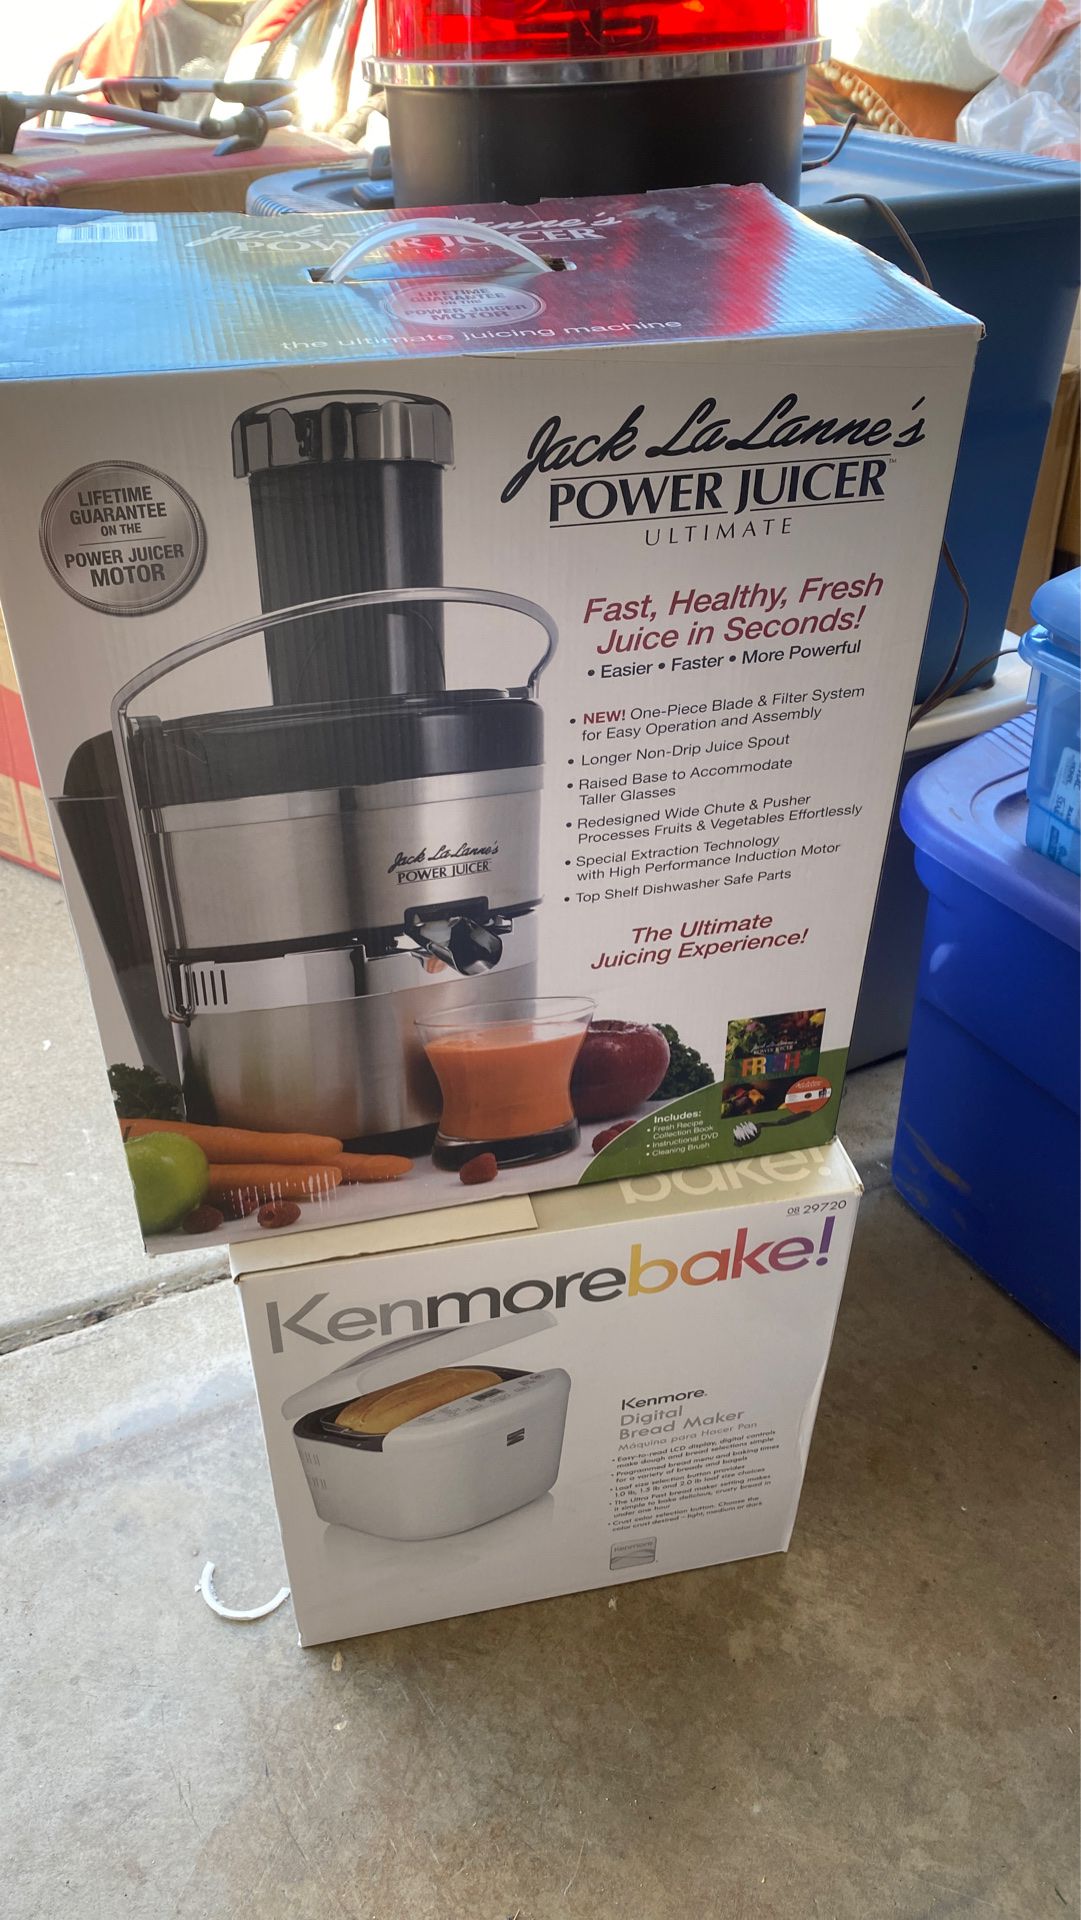 Power Juicer and Bread Maker